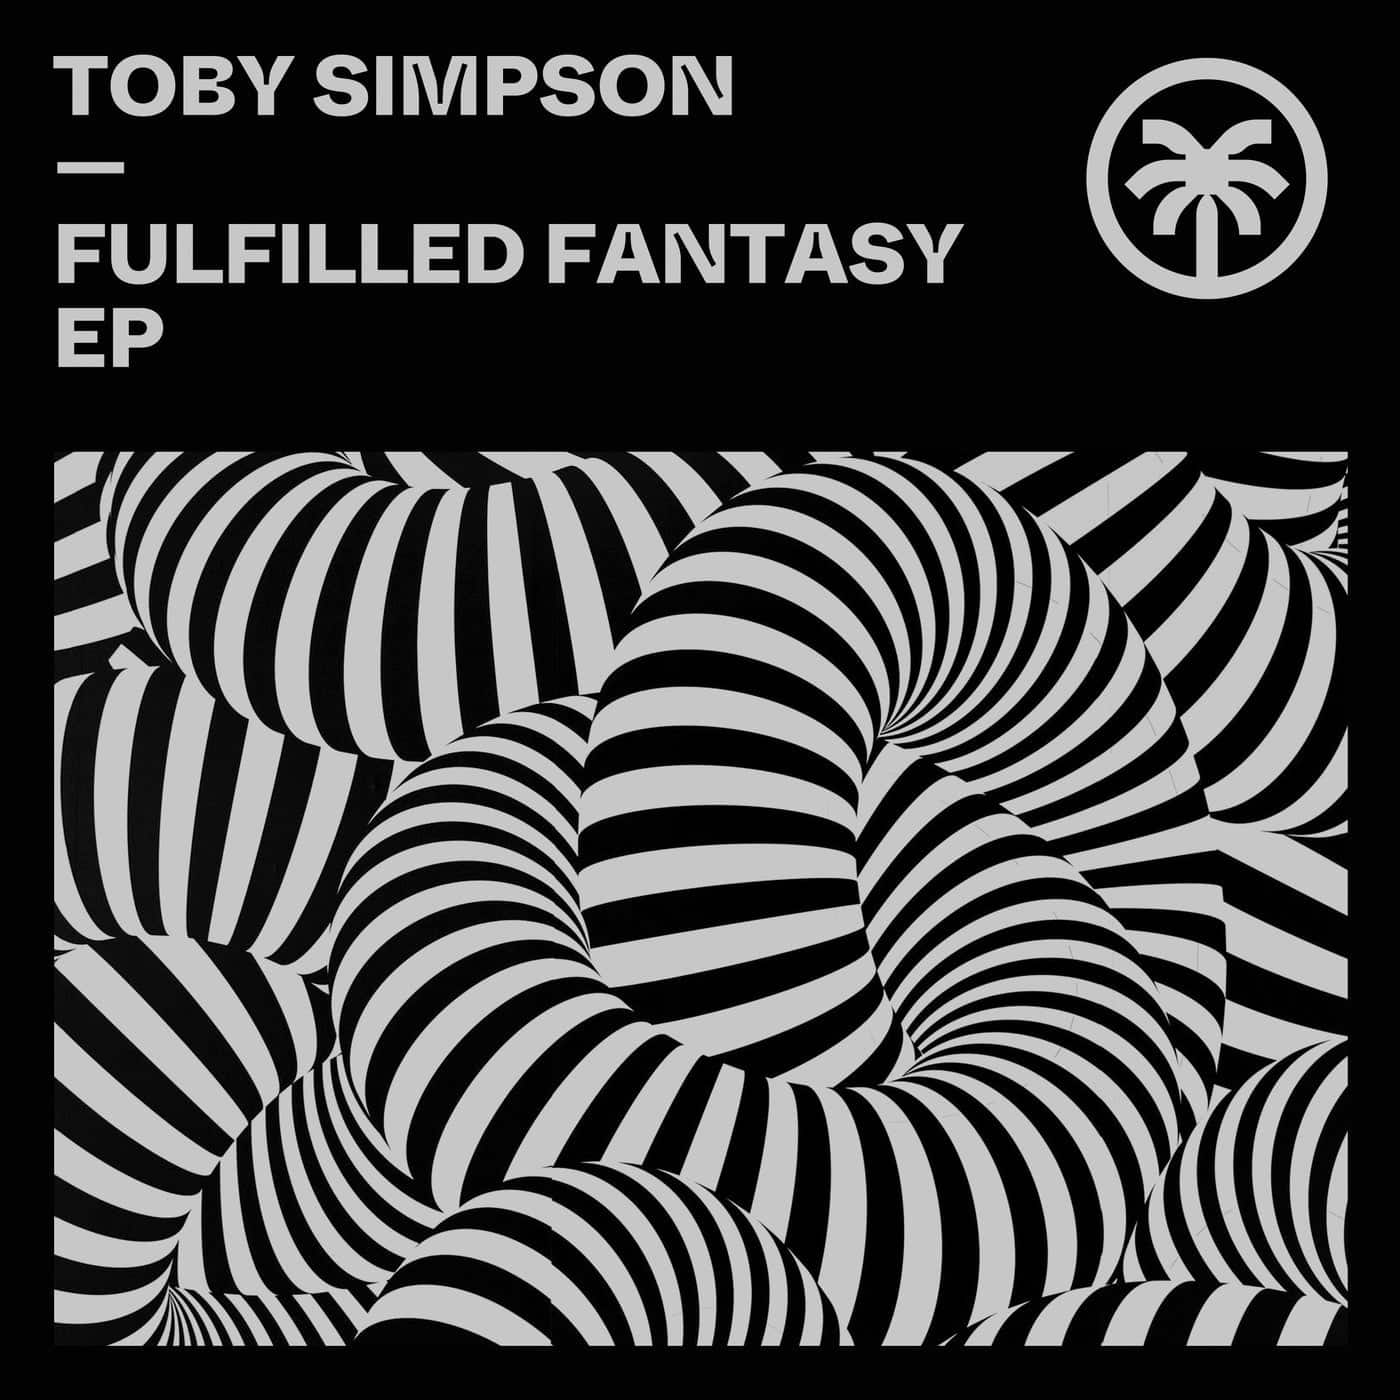 image cover: Toby Simpson - Fulfilled Fantasy EP / HXT091